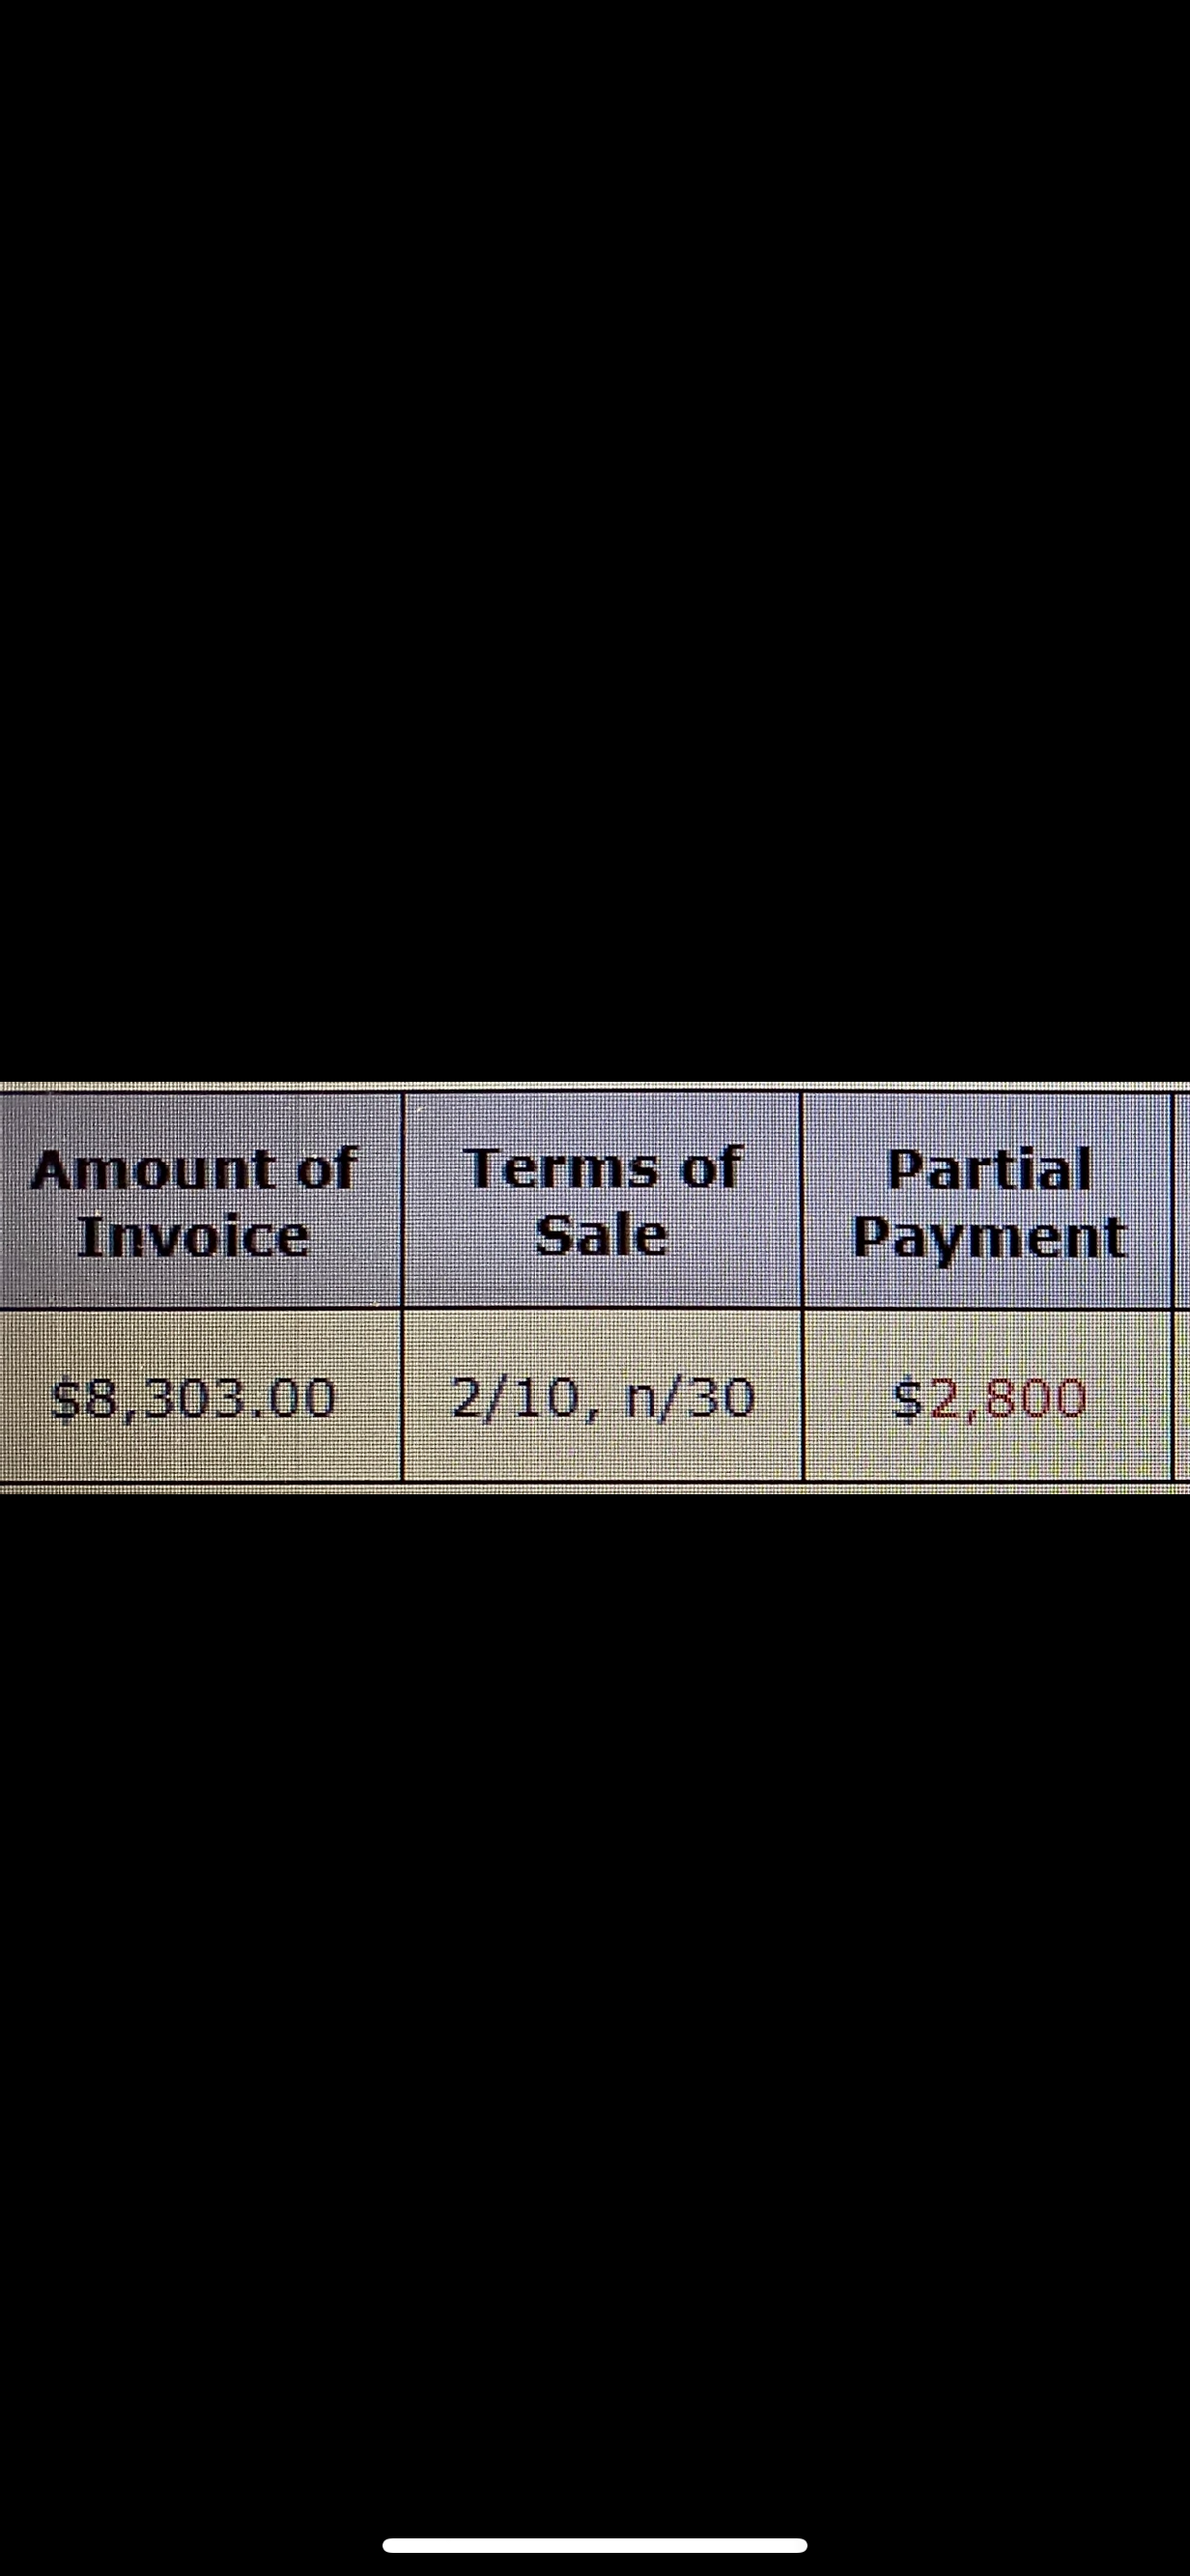 Partial
Amount of
Invoice
Terms of
Sale
Payment
$8,303.00
2/10, n/30
S2,800
